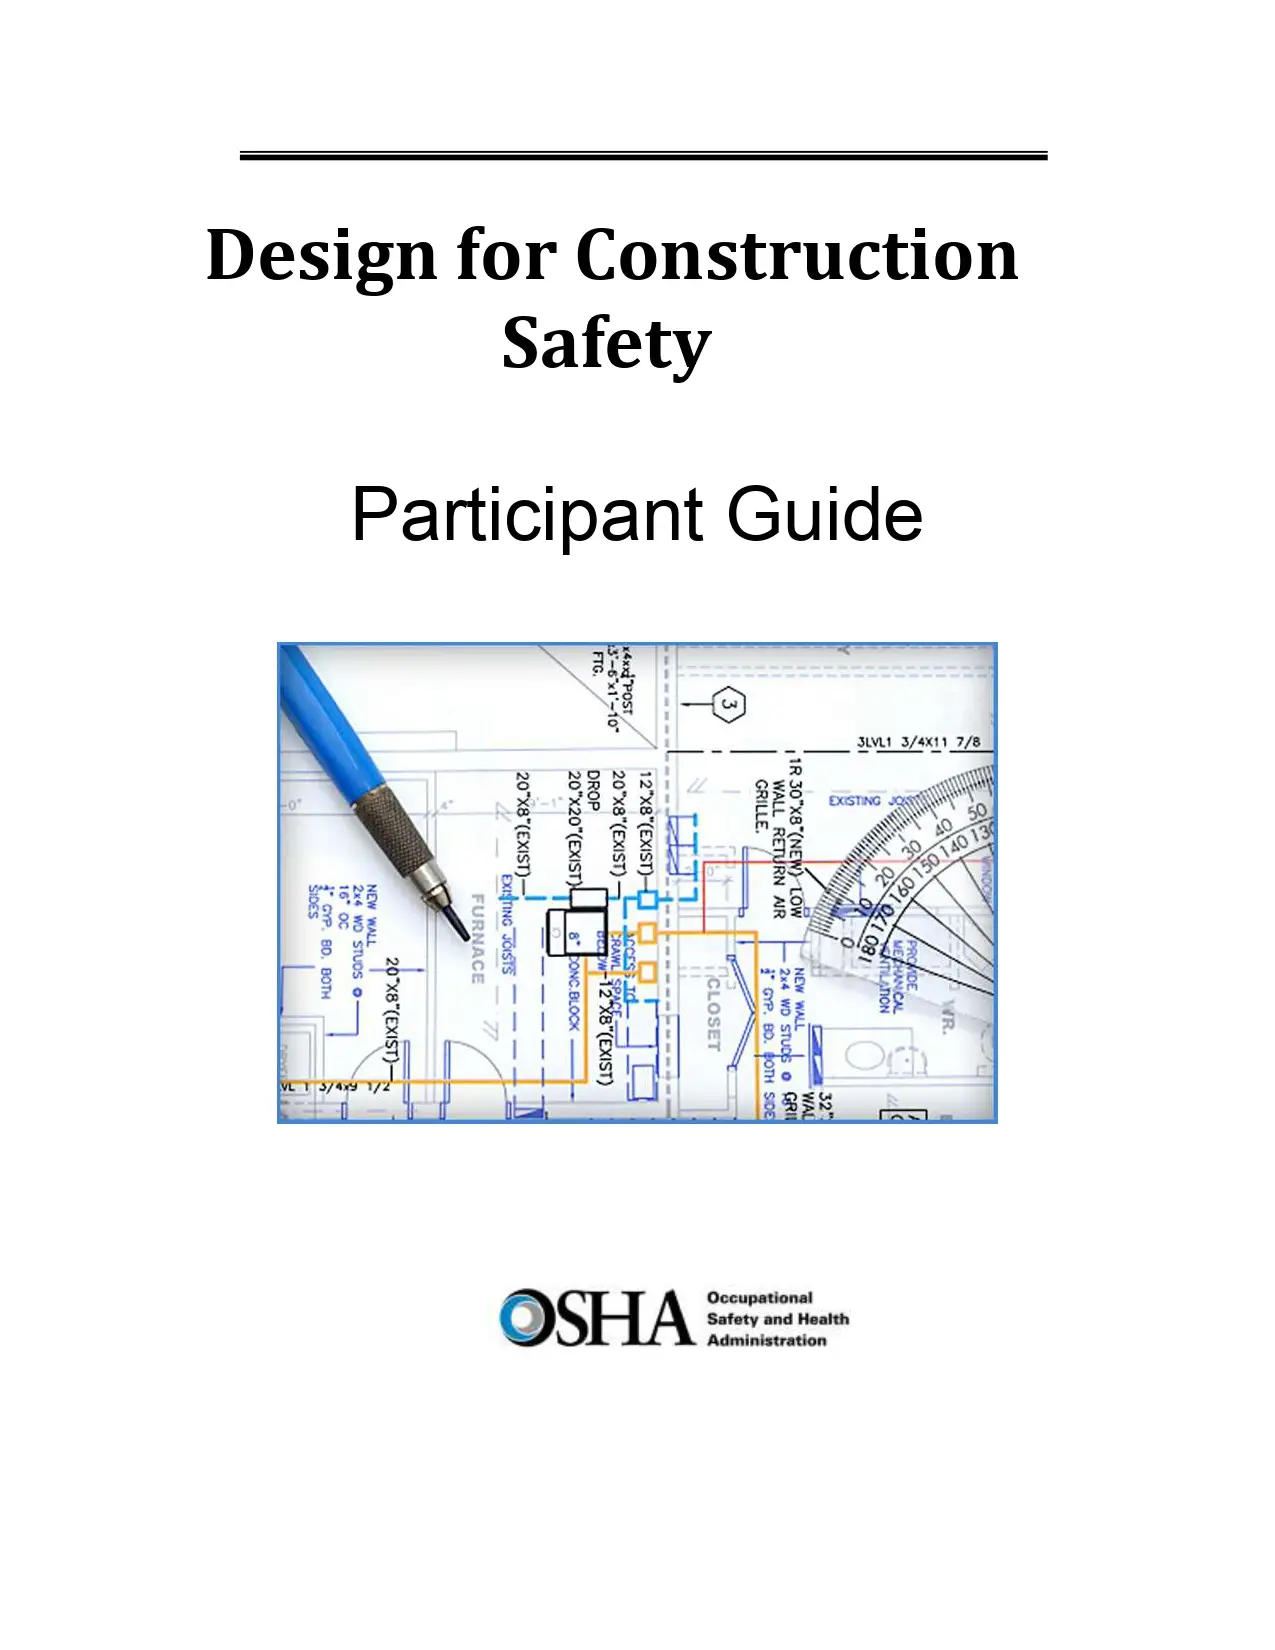 Design for Construction Safety (Participant Guide)